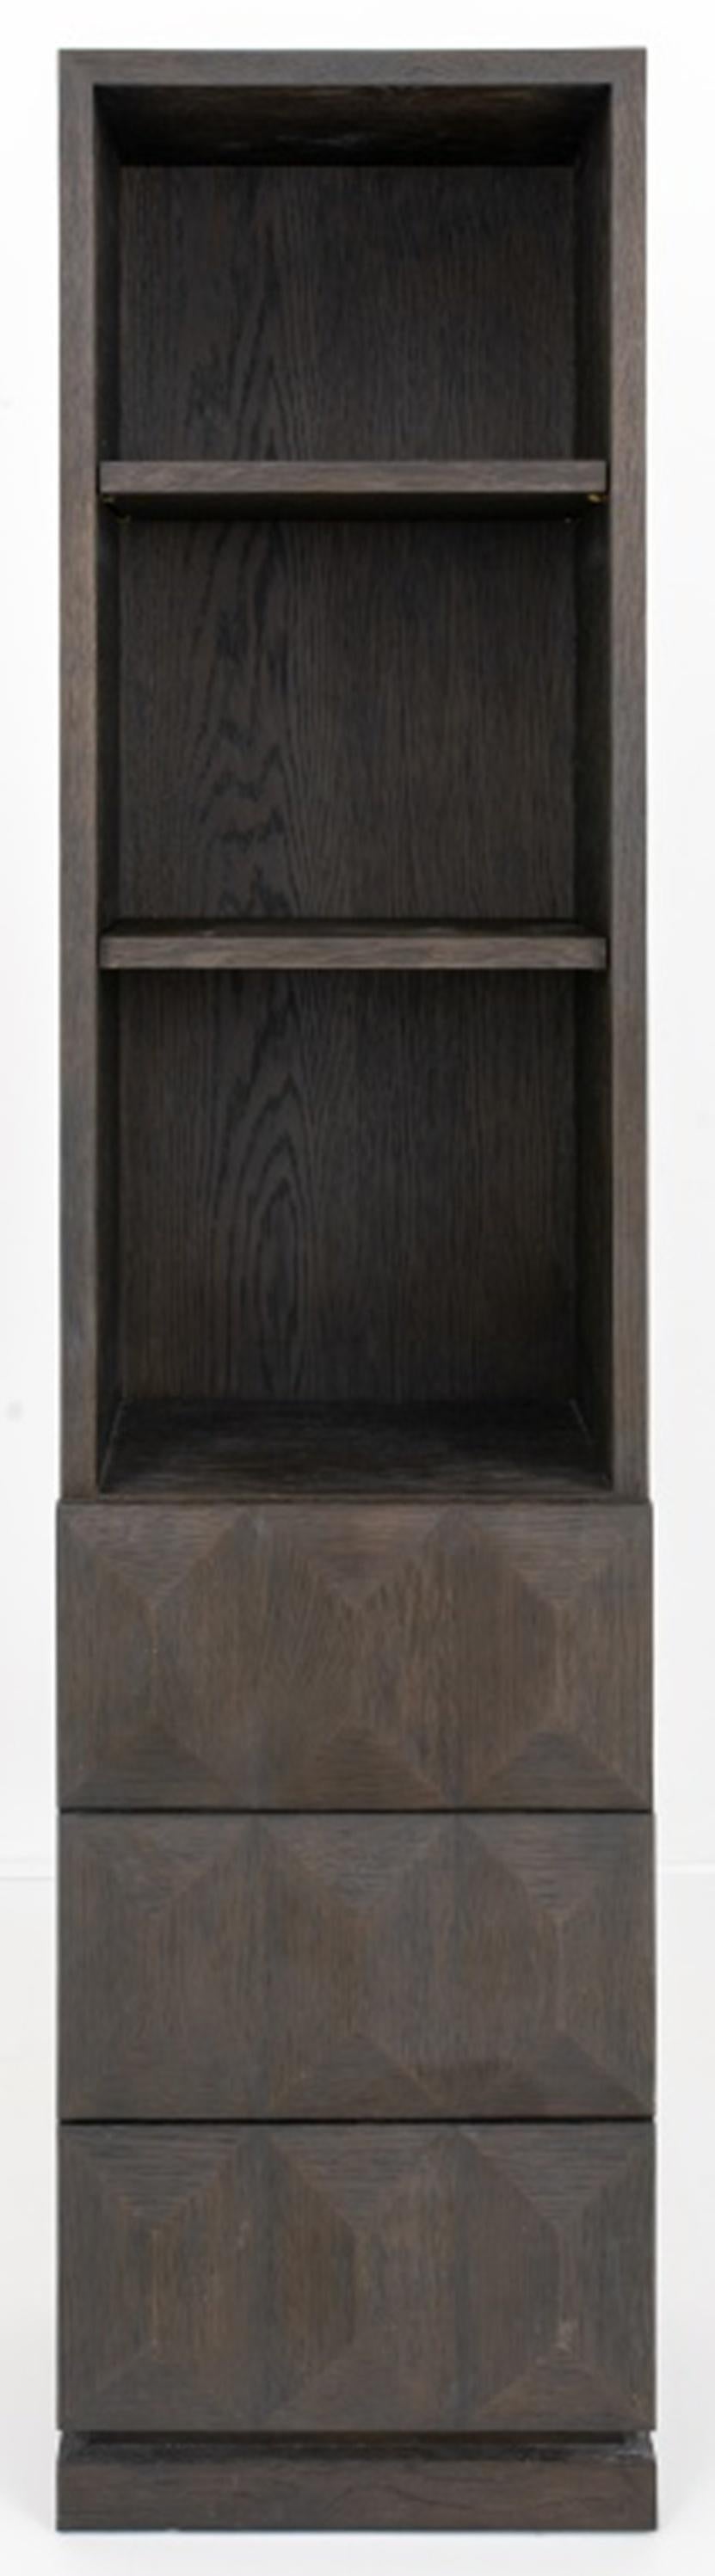 Richard Forwood (British, XX)  for Restoration Hardware 'Geometric' bookcase (designed 2016)  in American oak, with two moveable shelves above three short drawers.   

Dimensions: 84